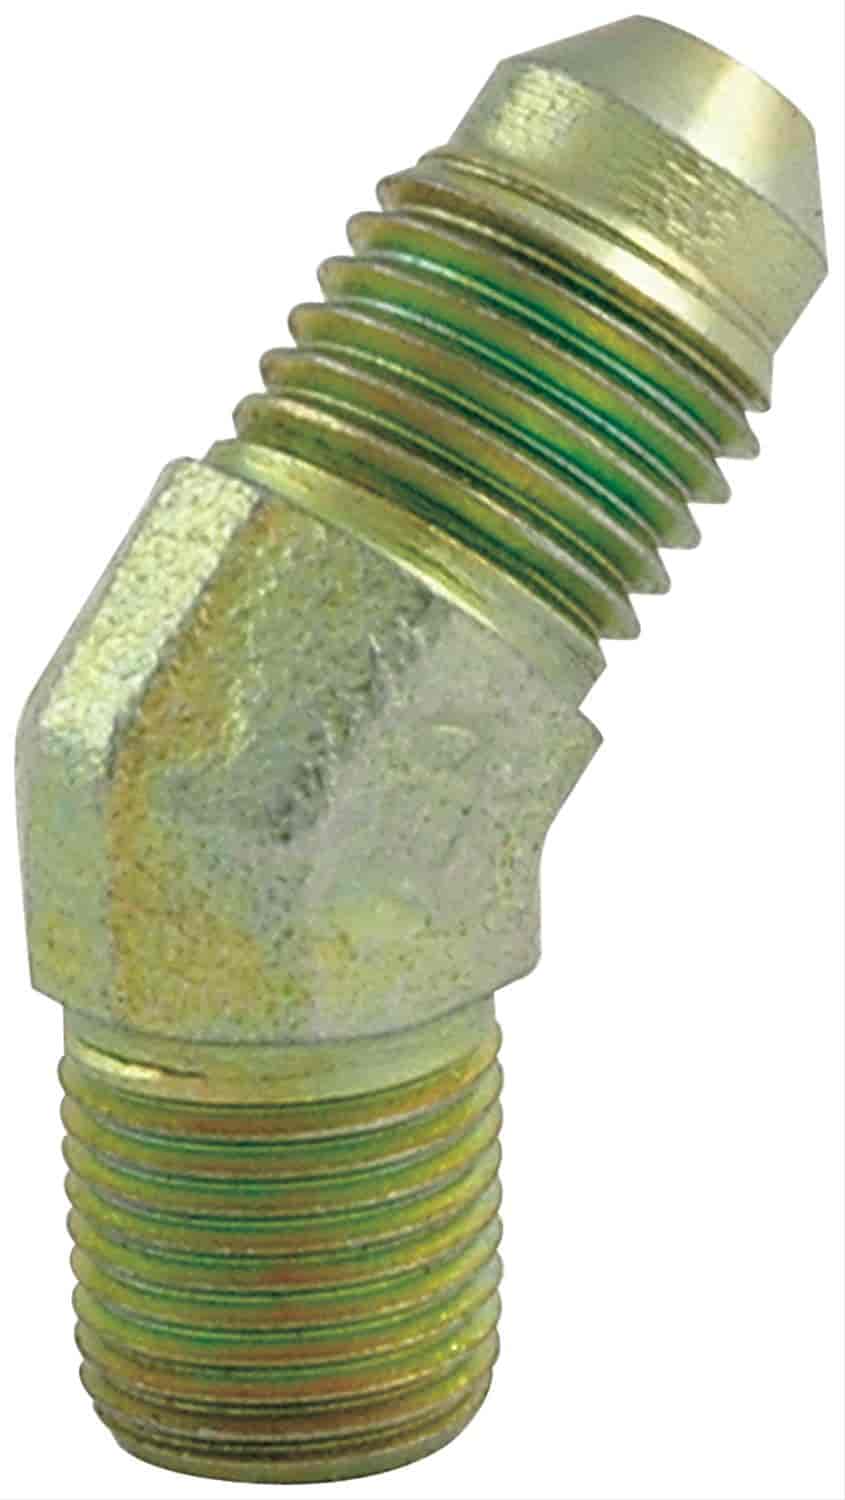 Adapter Fitting -4AN Male to 1/8" NPT Male